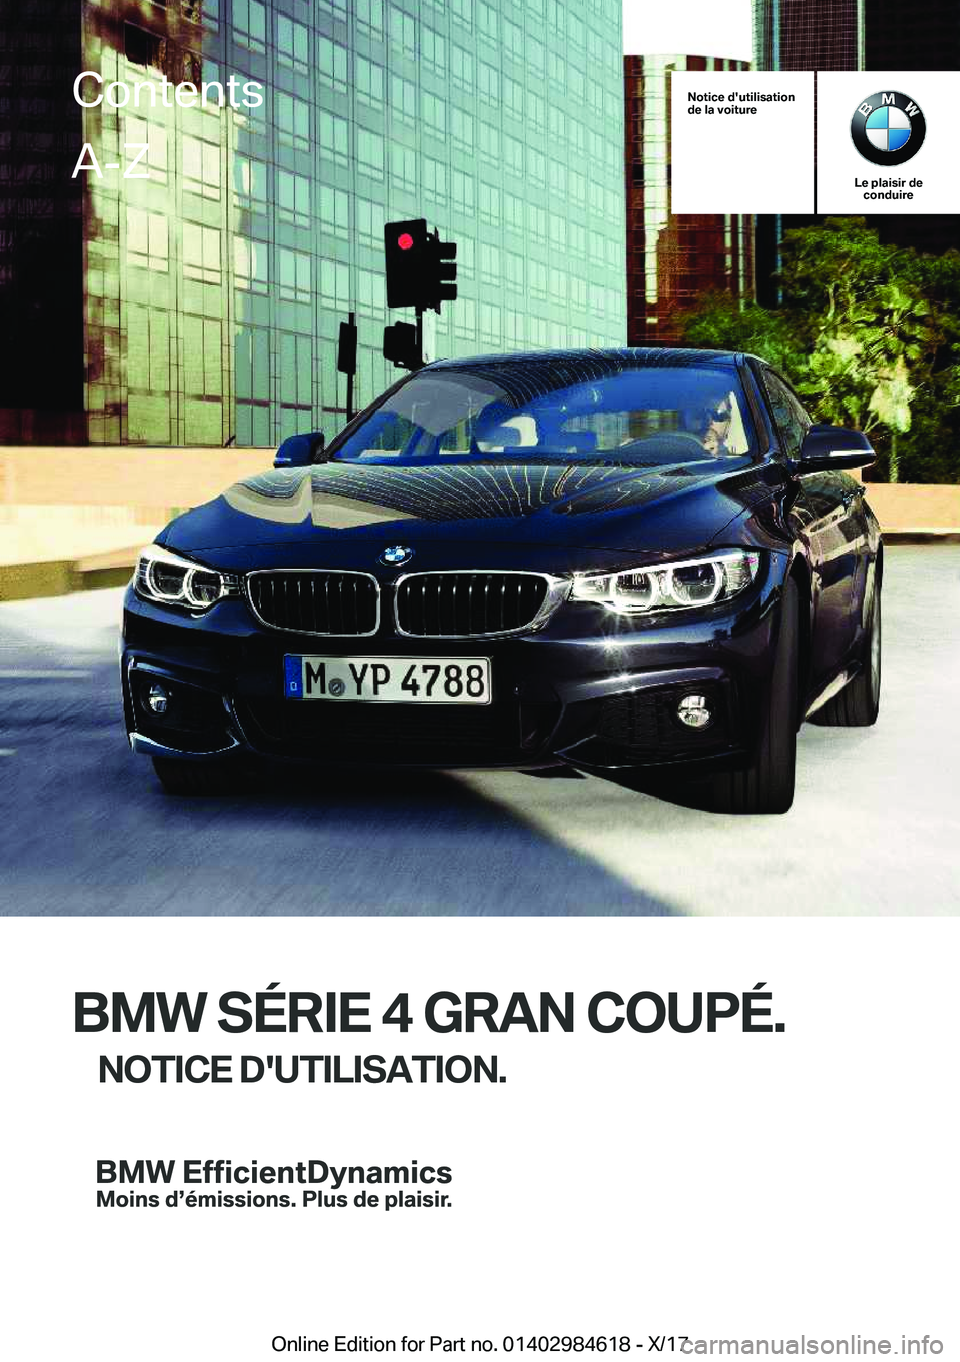 BMW 4 SERIES GRAN COUPE 2018  Notices Demploi (in French) �N�o�t�i�c�e��d�'�u�t�i�l�i�s�a�t�i�o�n
�d�e��l�a��v�o�i�t�u�r�e
�L�e��p�l�a�i�s�i�r��d�e �c�o�n�d�u�i�r�e
�B�M�W��S�